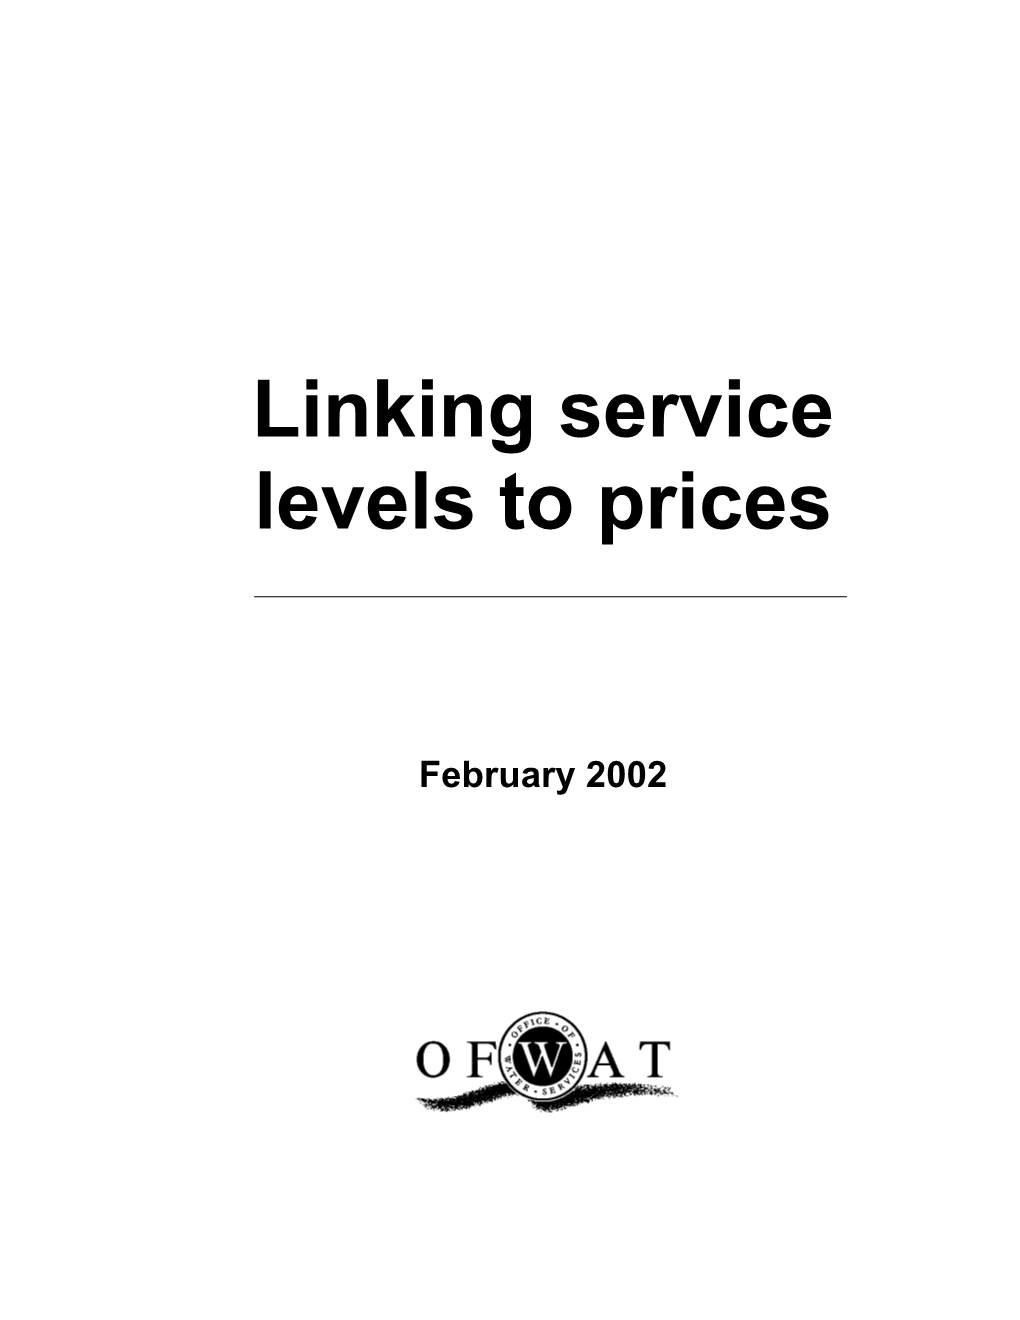 Linking Service Levels to Prices